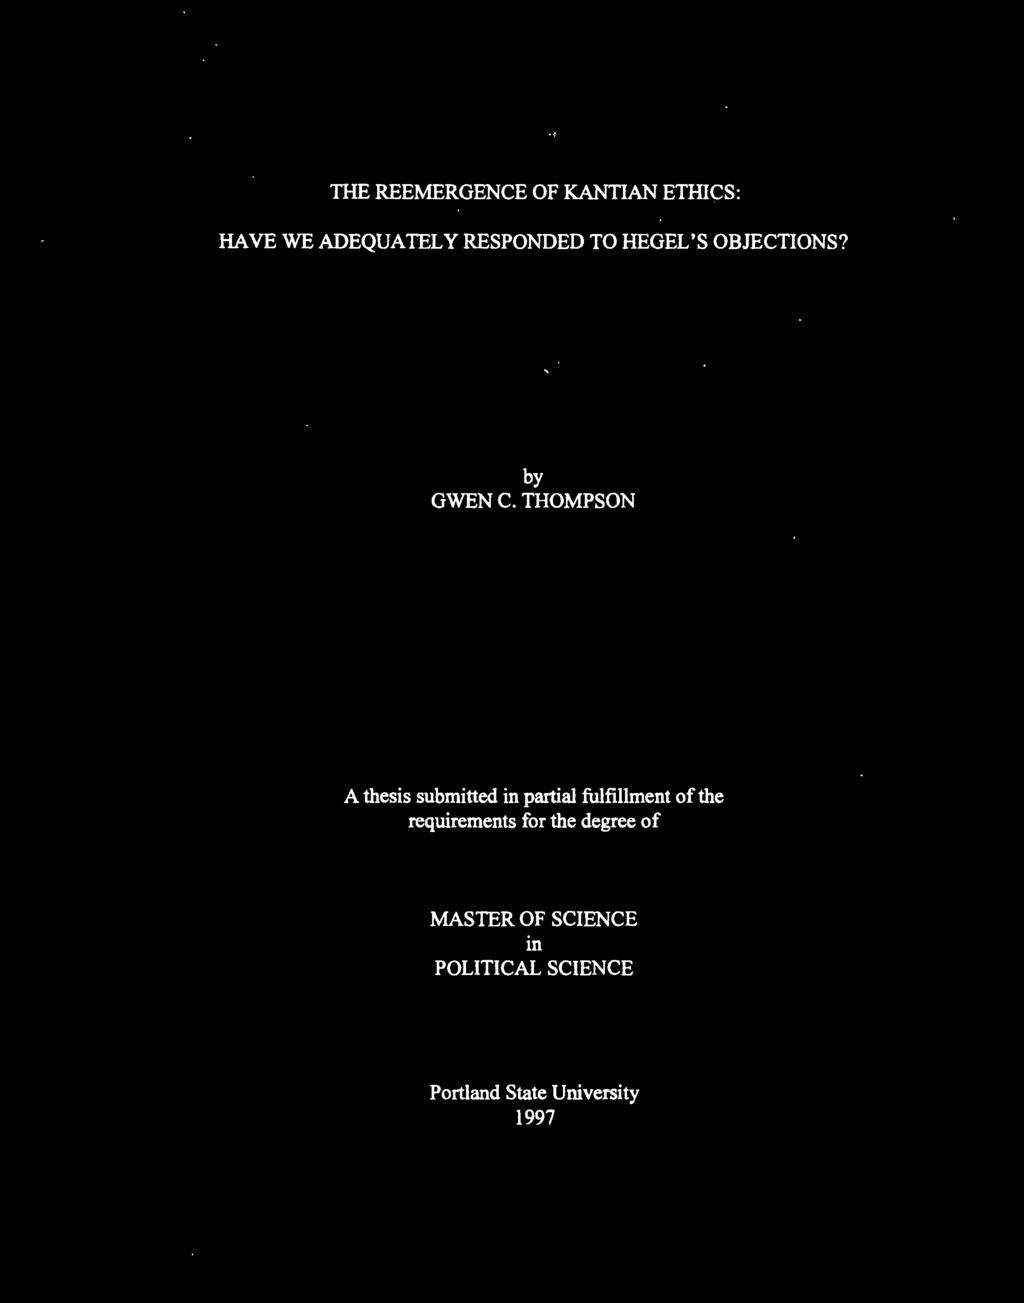 THOMPSON A thesis submitted in partial fulfillment of the